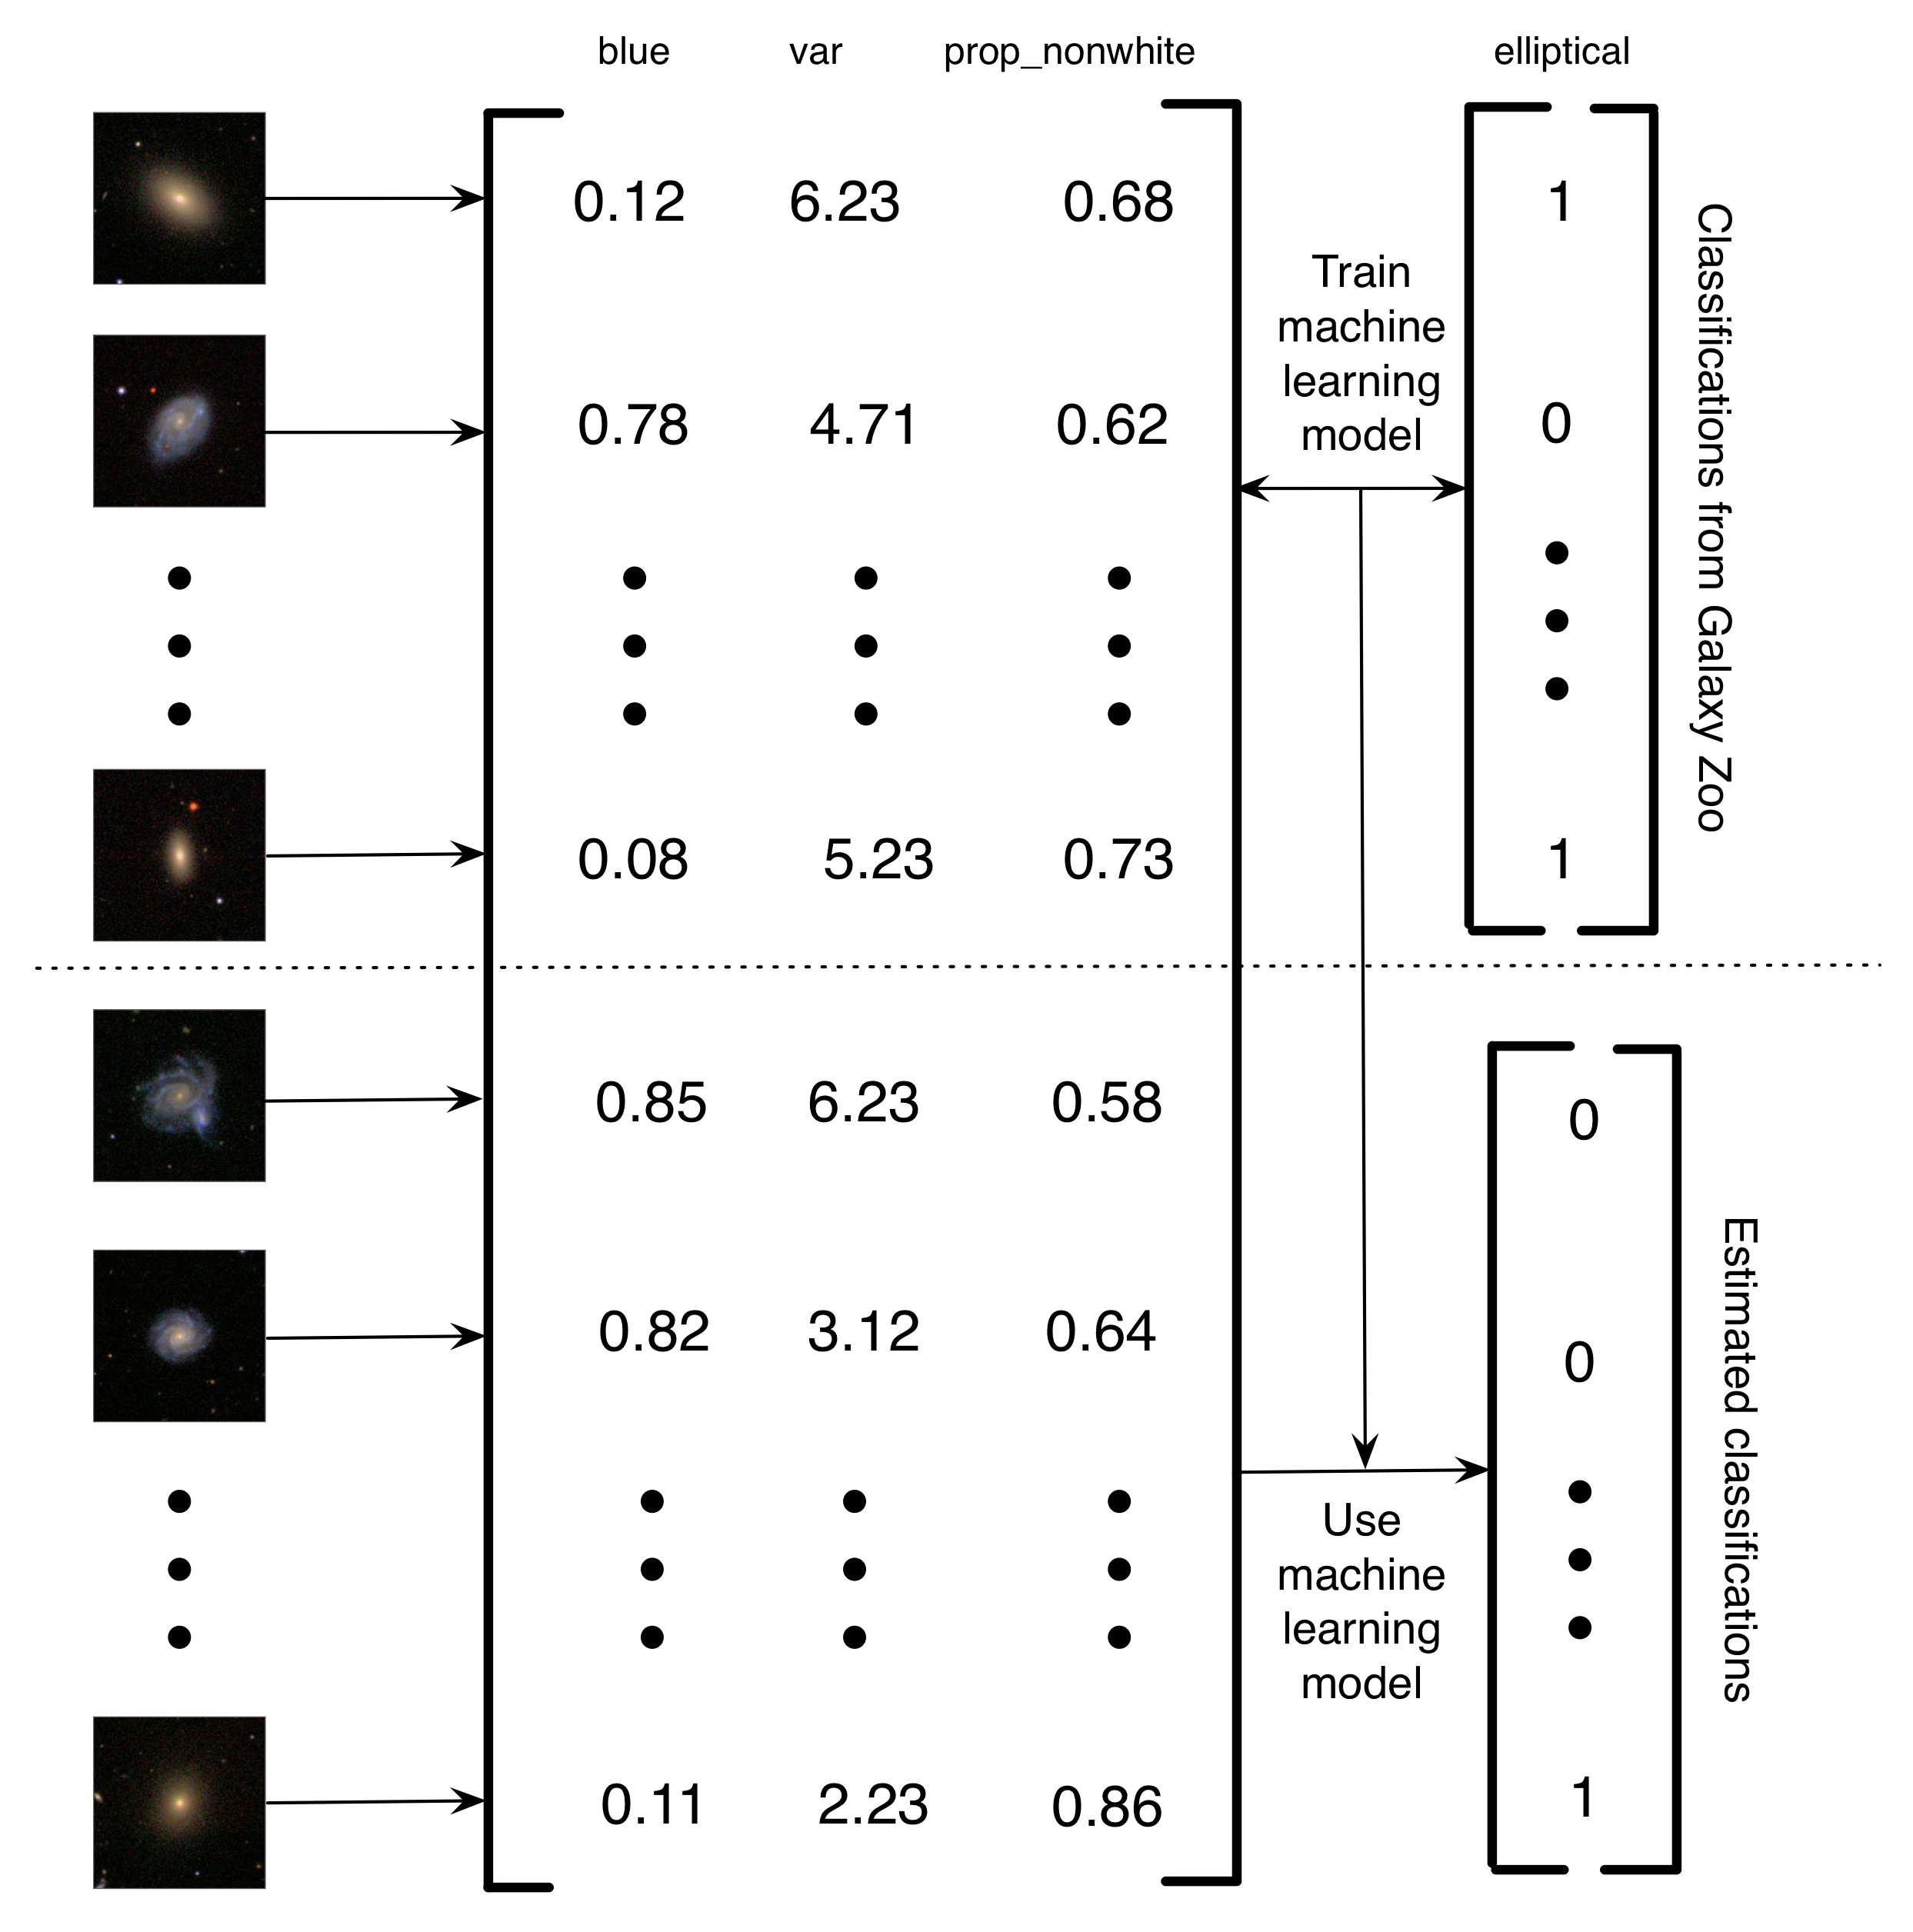 Figure 5.4: Simplified description of how Banerji et al. (2010) used the Galaxy Zoo classifications to train a machine learning model to do galaxy classification. Images of galaxies were converted in a matrix of features. In this simplified example, there are three features (the amount of blue in the image, the variance in the brightness of the pixels, and the proportion of nonwhite pixels). Then, for a subset of the images, the Galaxy Zoo labels are used to train a machine learning model. Finally, the machine learning is used to estimate classifications for the remaining galaxies. I call this a computer-assisted human computation project because, rather than having humans solve a problem, it has humans build a dataset that can be used to train a computer to solve the problem. The advantage of this computer-assisted human computation system is that it enables you to handle essentially infinite amounts of data using only a finite amount of human effort. Images of galaxies reproduced by permission from Sloan Digital Sky Survey.